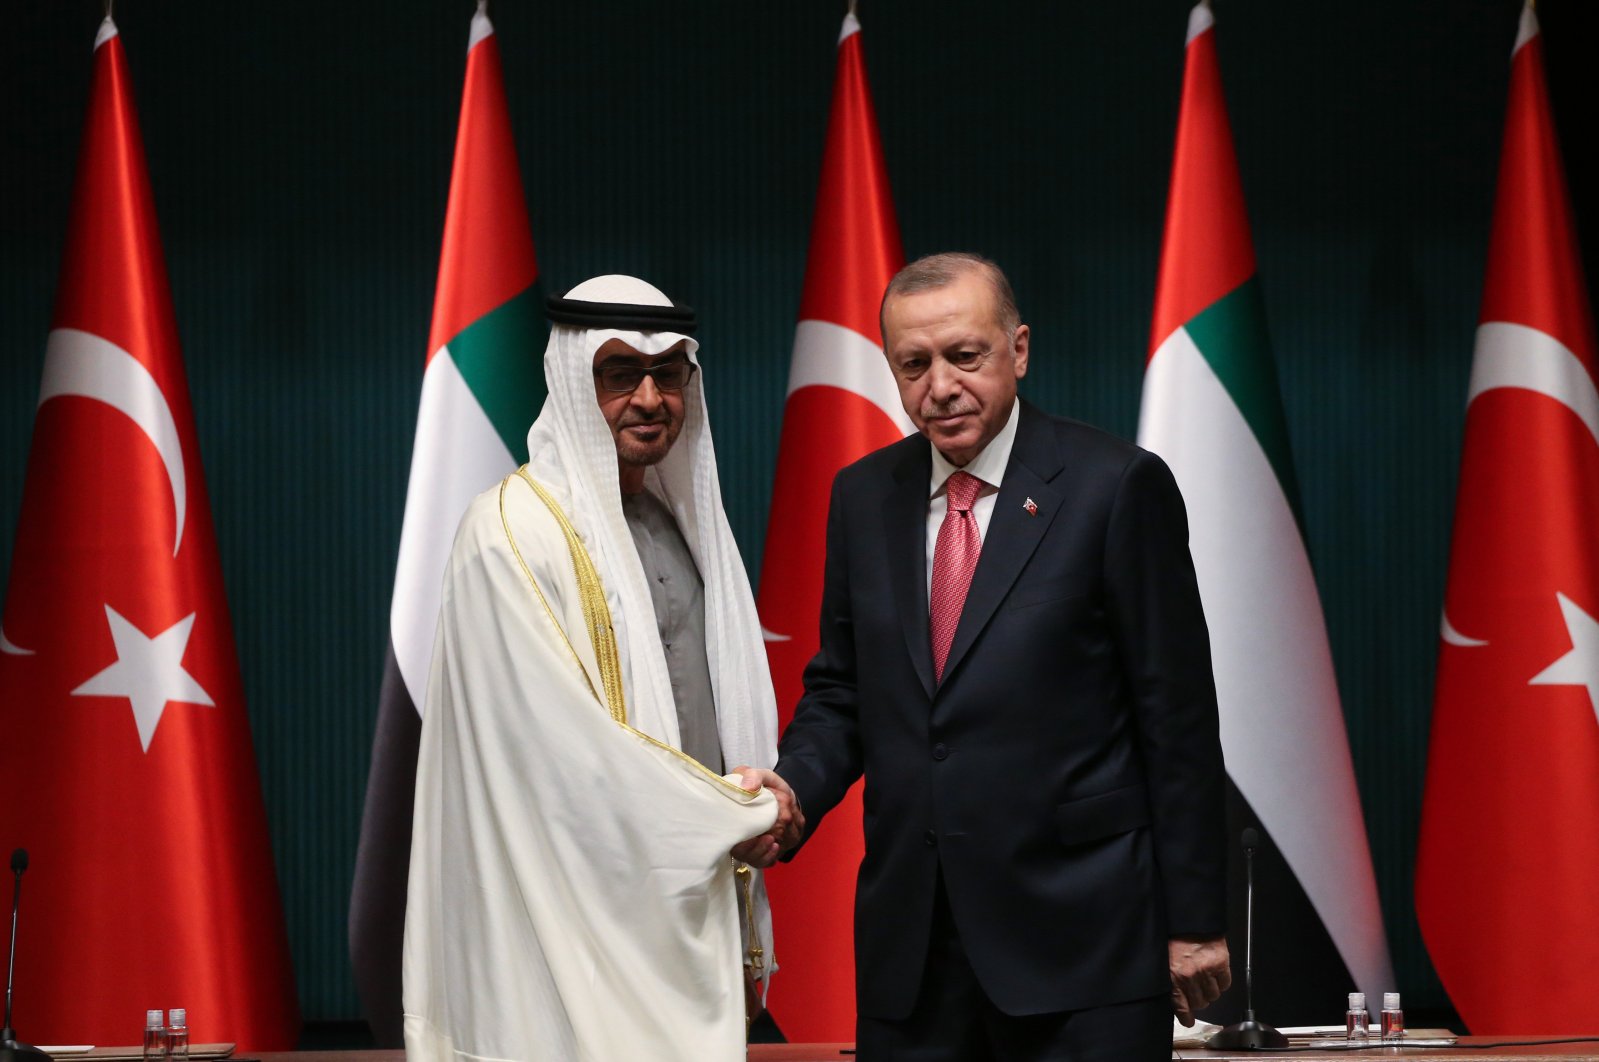 President Recep Tayyip Erdoğan shakes hands with Crown Prince of the Emirate of Abu Dhabi, Sheikh Mohammed bin Zayed Al Nahyan (L) during an agreement ceremony after their meeting at the Presidential Complex in Ankara, Turkey, Nov. 24, 2021. (EPA File Photo)